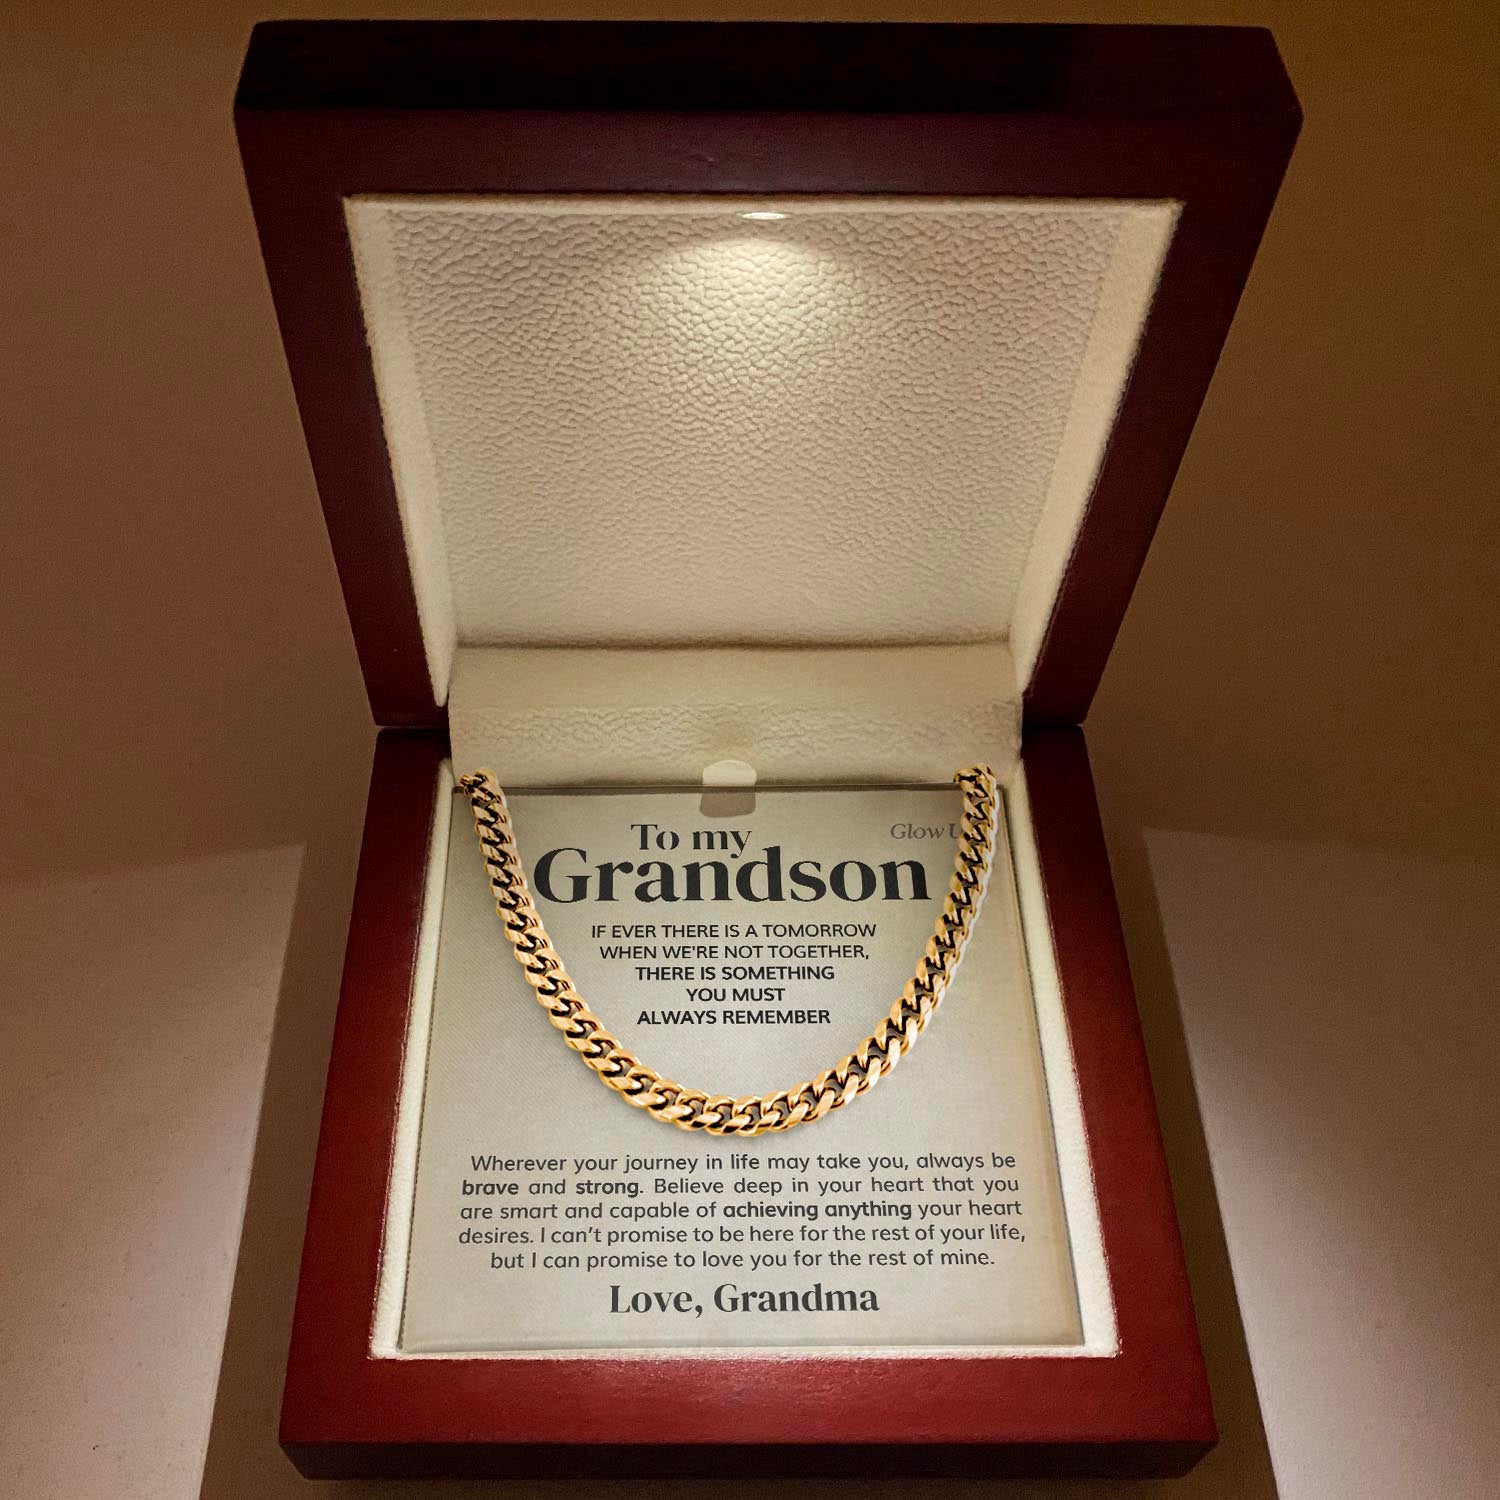 ShineOn Fulfillment Jewelry 14K Yellow Gold Finish / Luxury LED Box To my Grandson - Always Remember - Cuban Link Chain